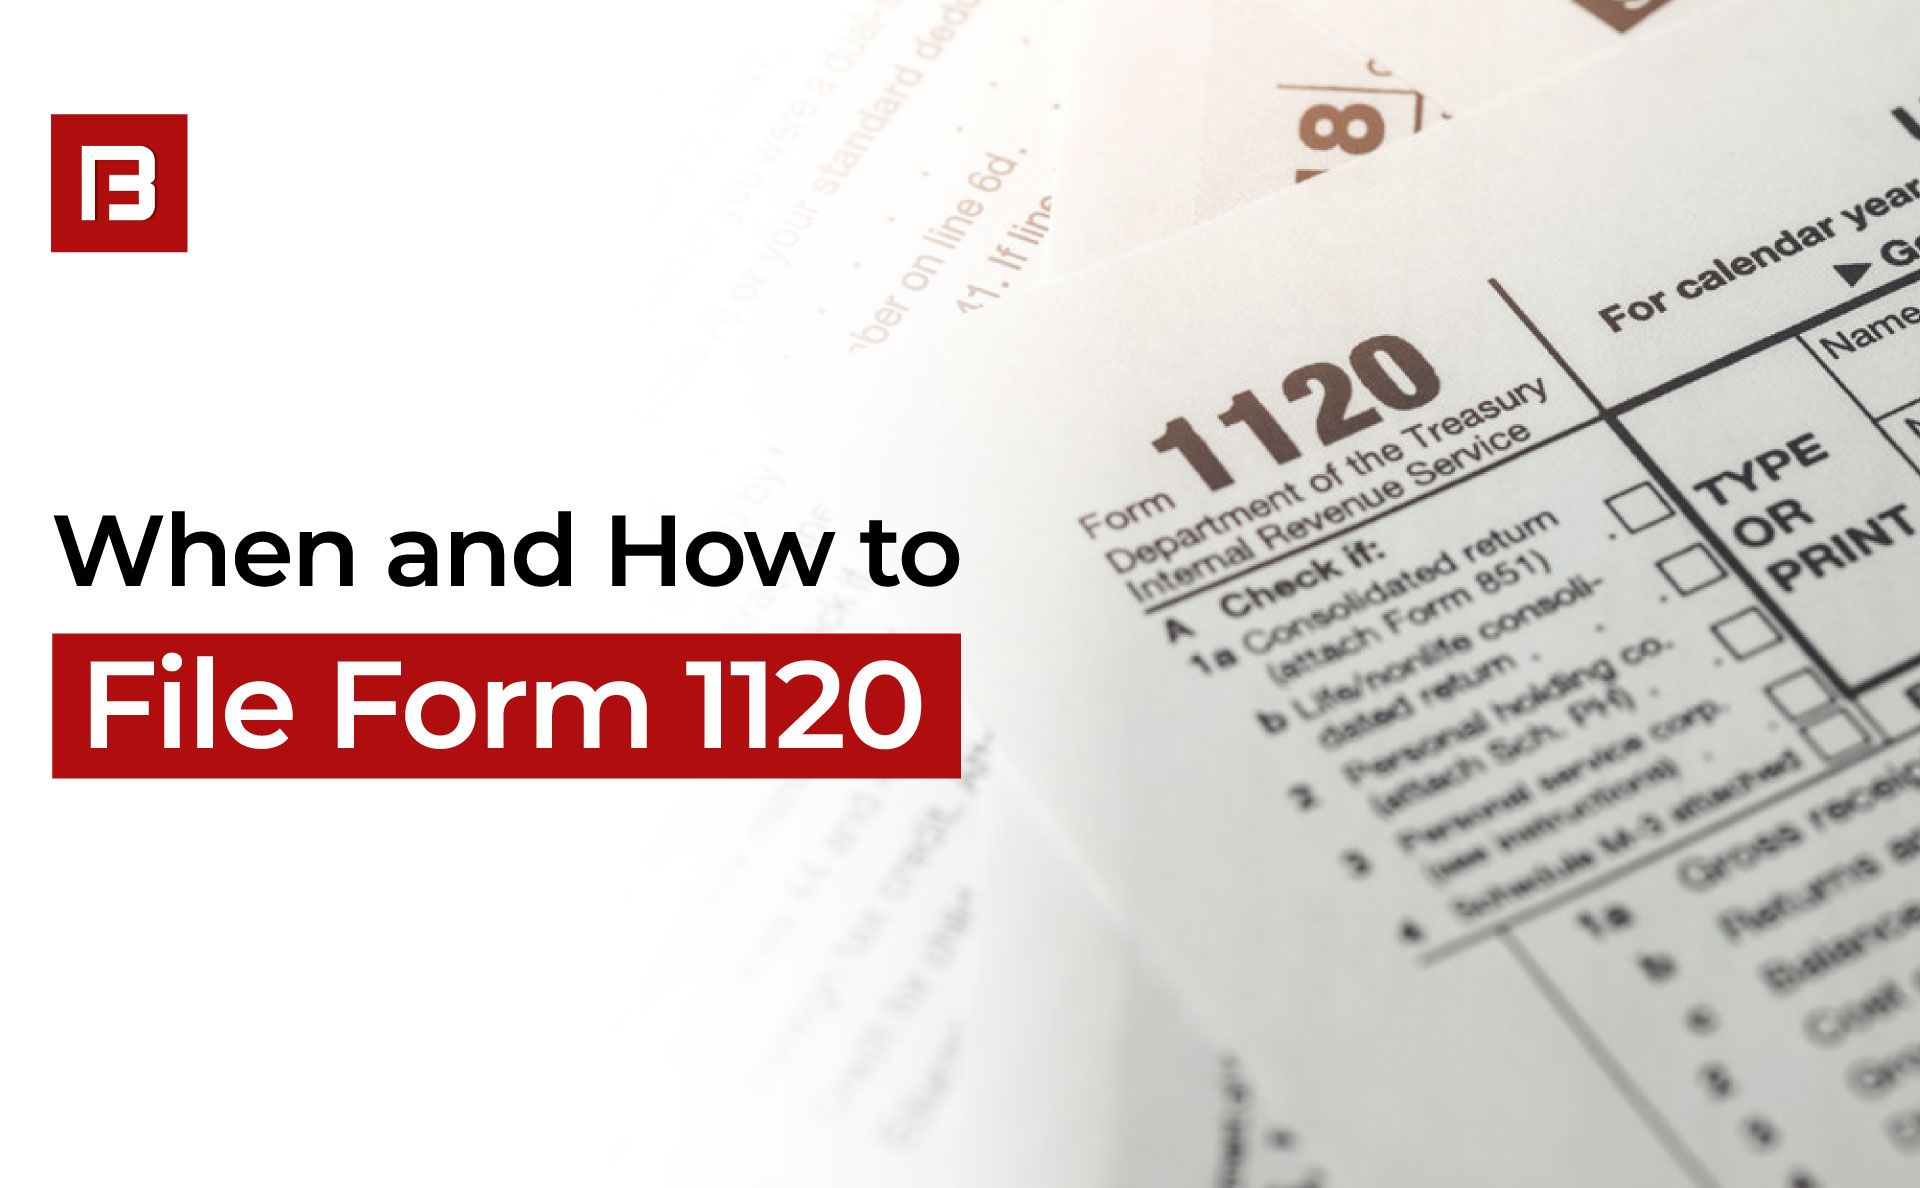 When and How to File Form 1120